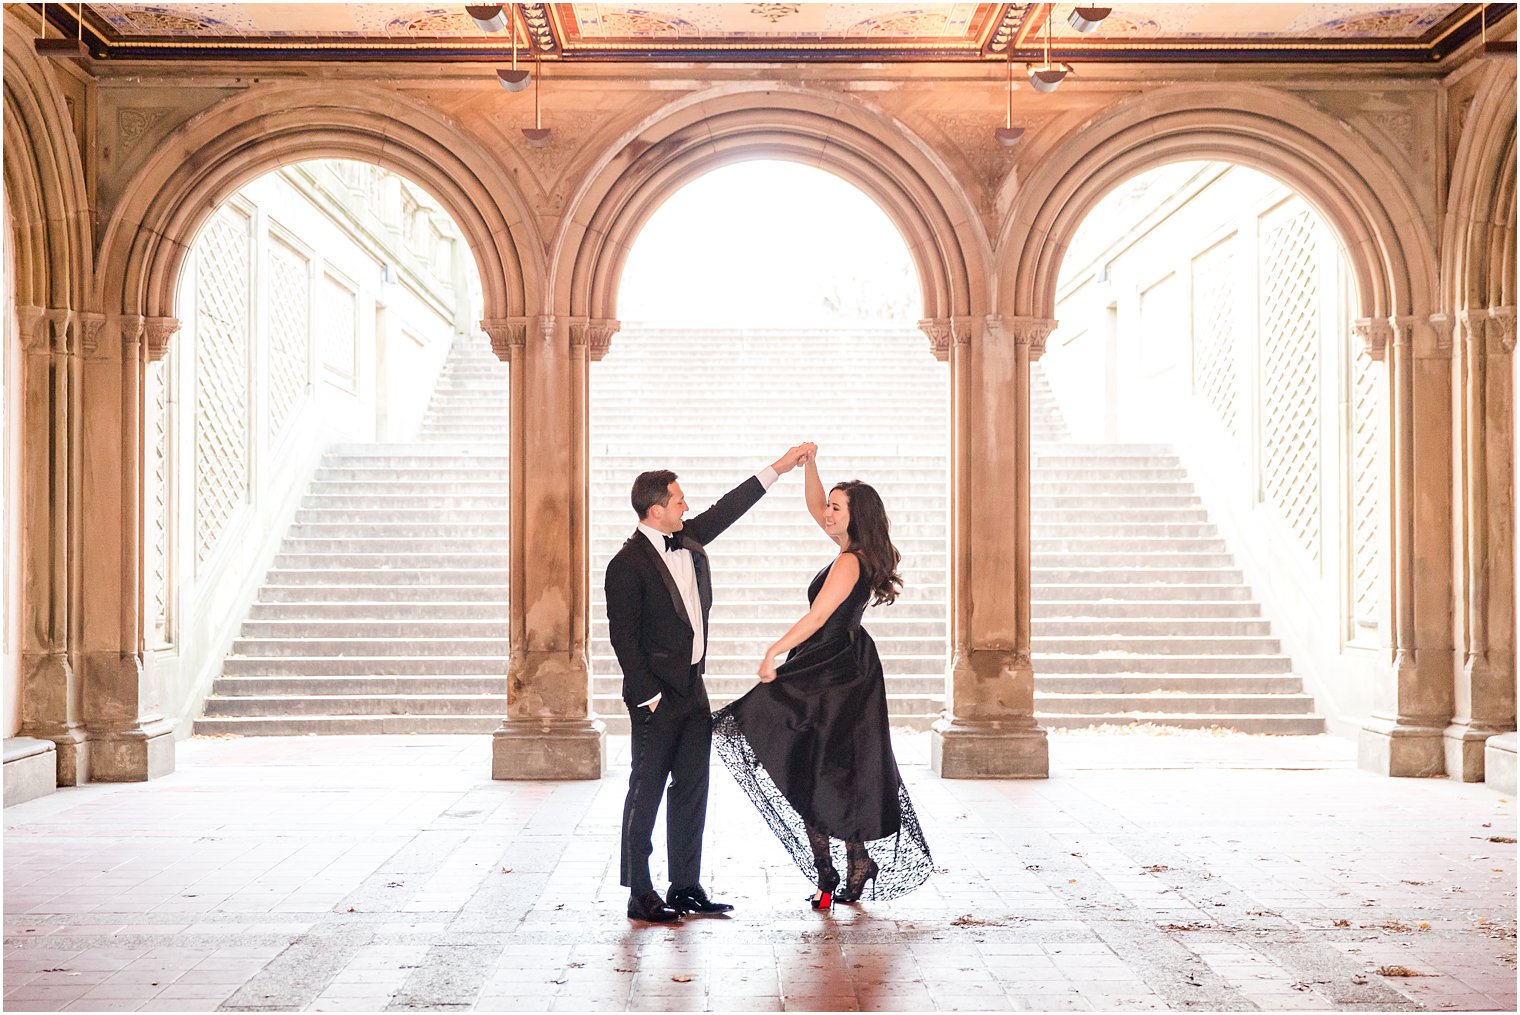 Engaged couple dancing at Bethesda Terrace in Central Park, NYC